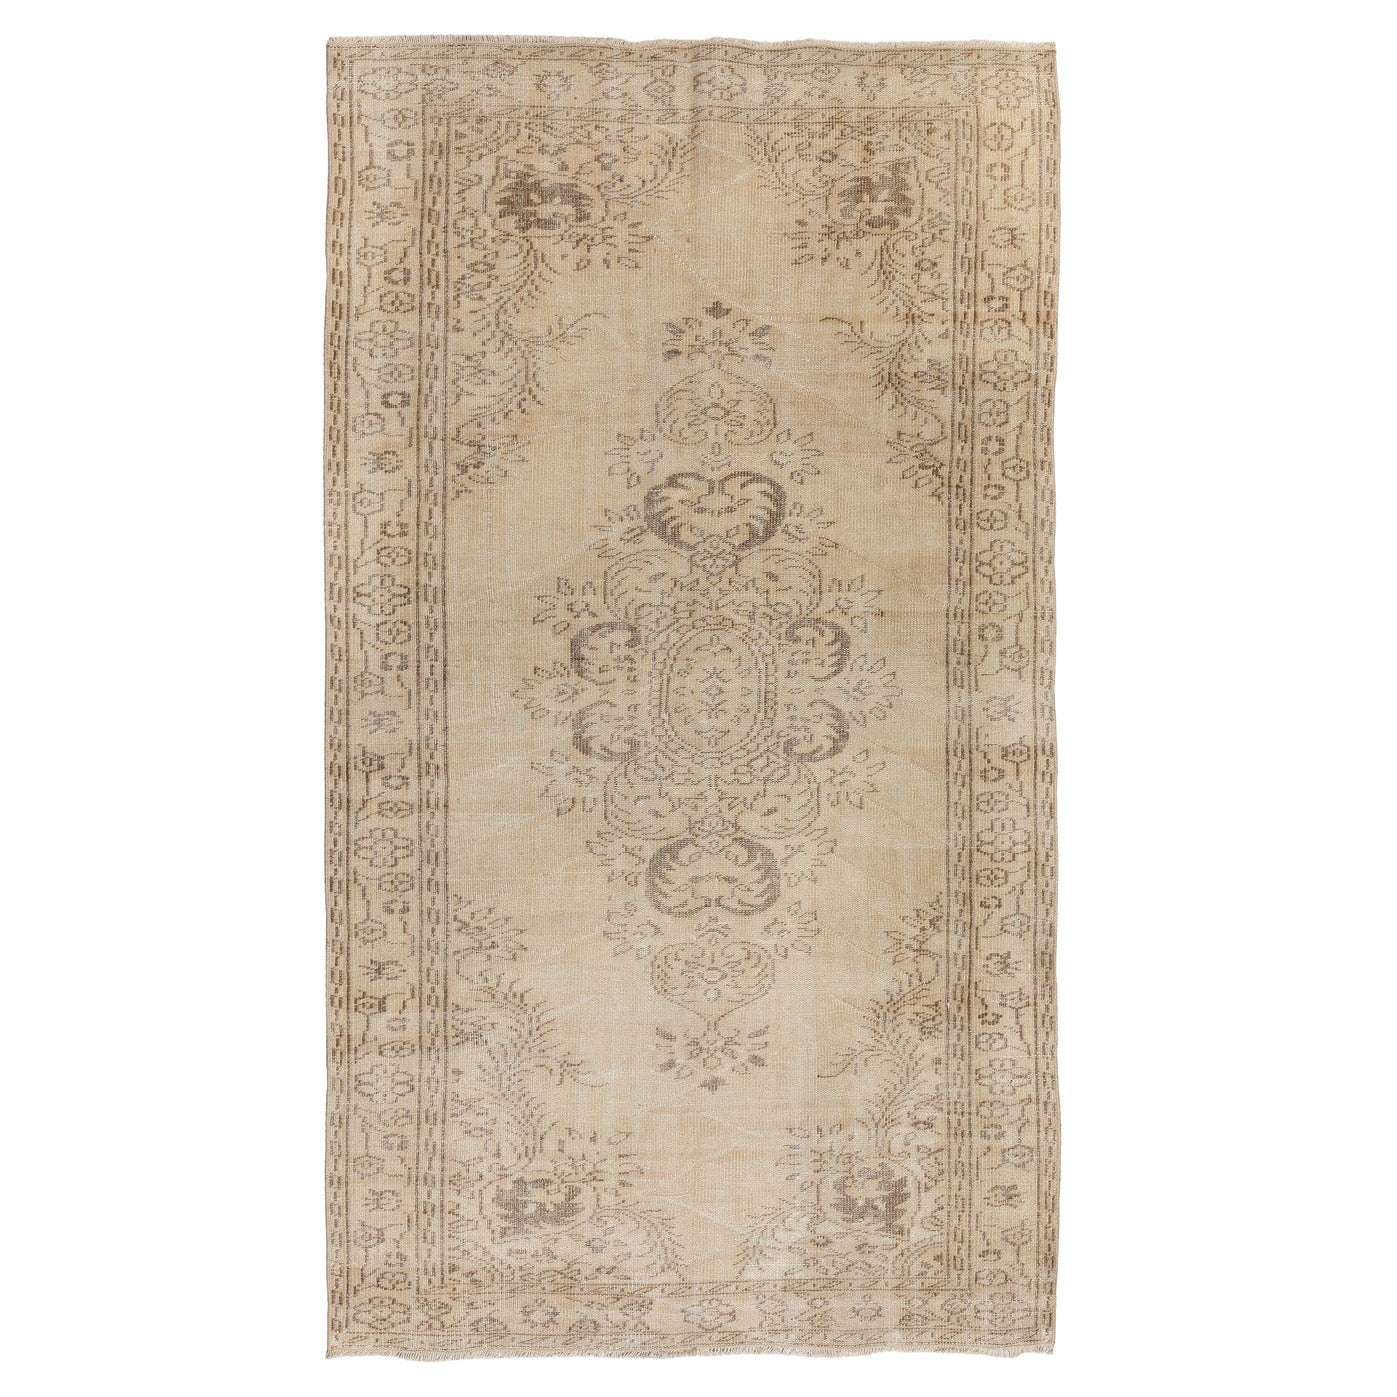 5.3x9.2 Ft Handmade Vintage Area Rug in Neutral Colors, Faded Anatolian Carpet